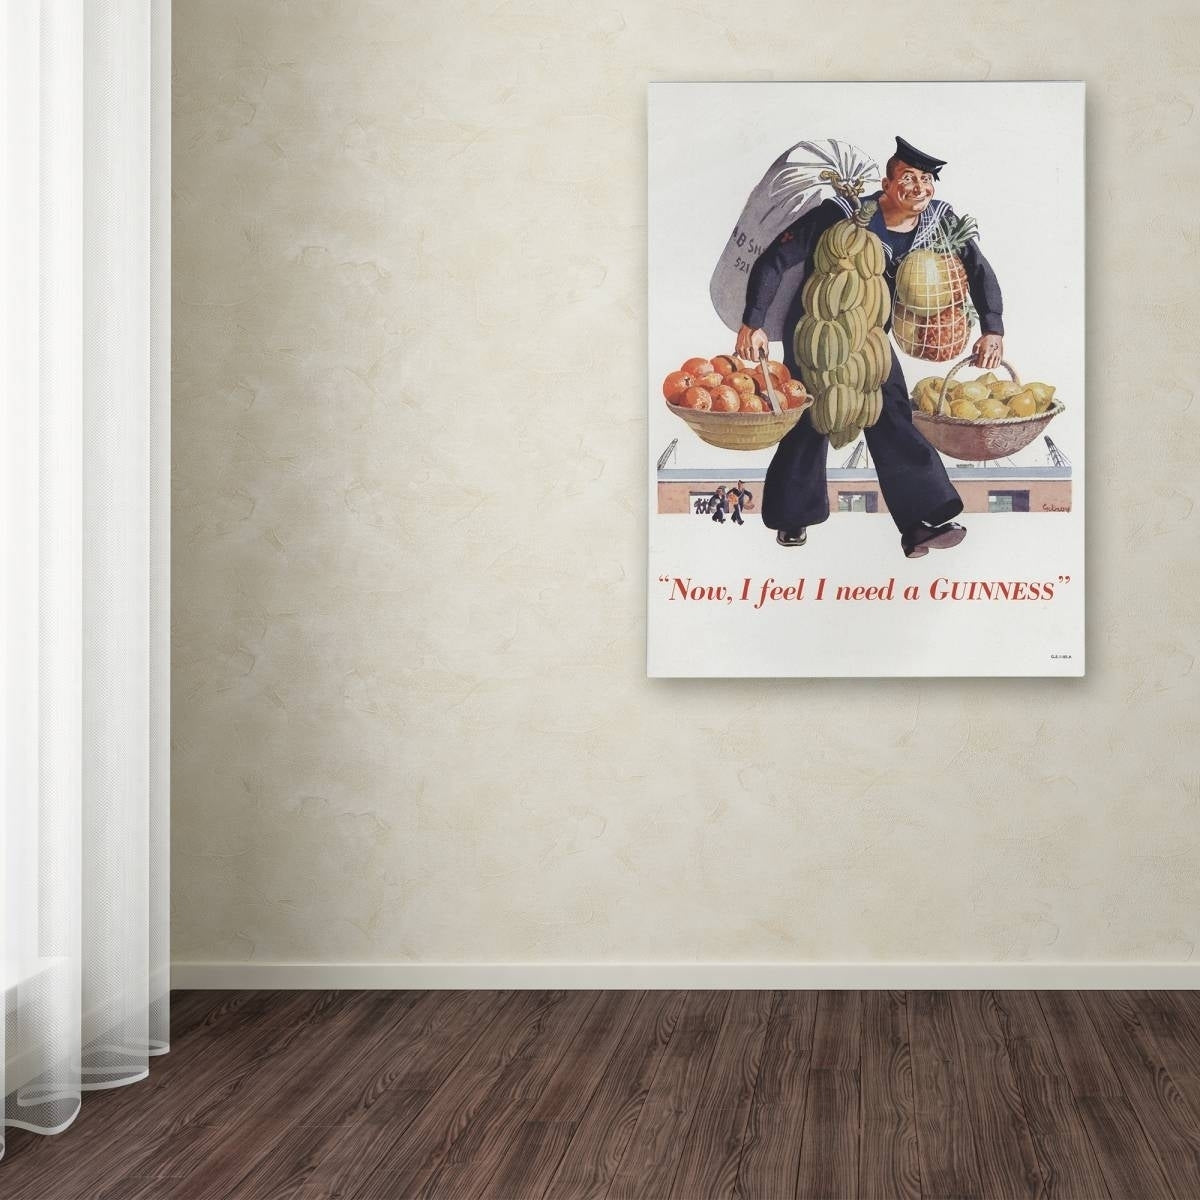 A Guinness Brewery 'Now I Feel I Need A Guinness' canvas art portraying a man carrying fruit in a room.